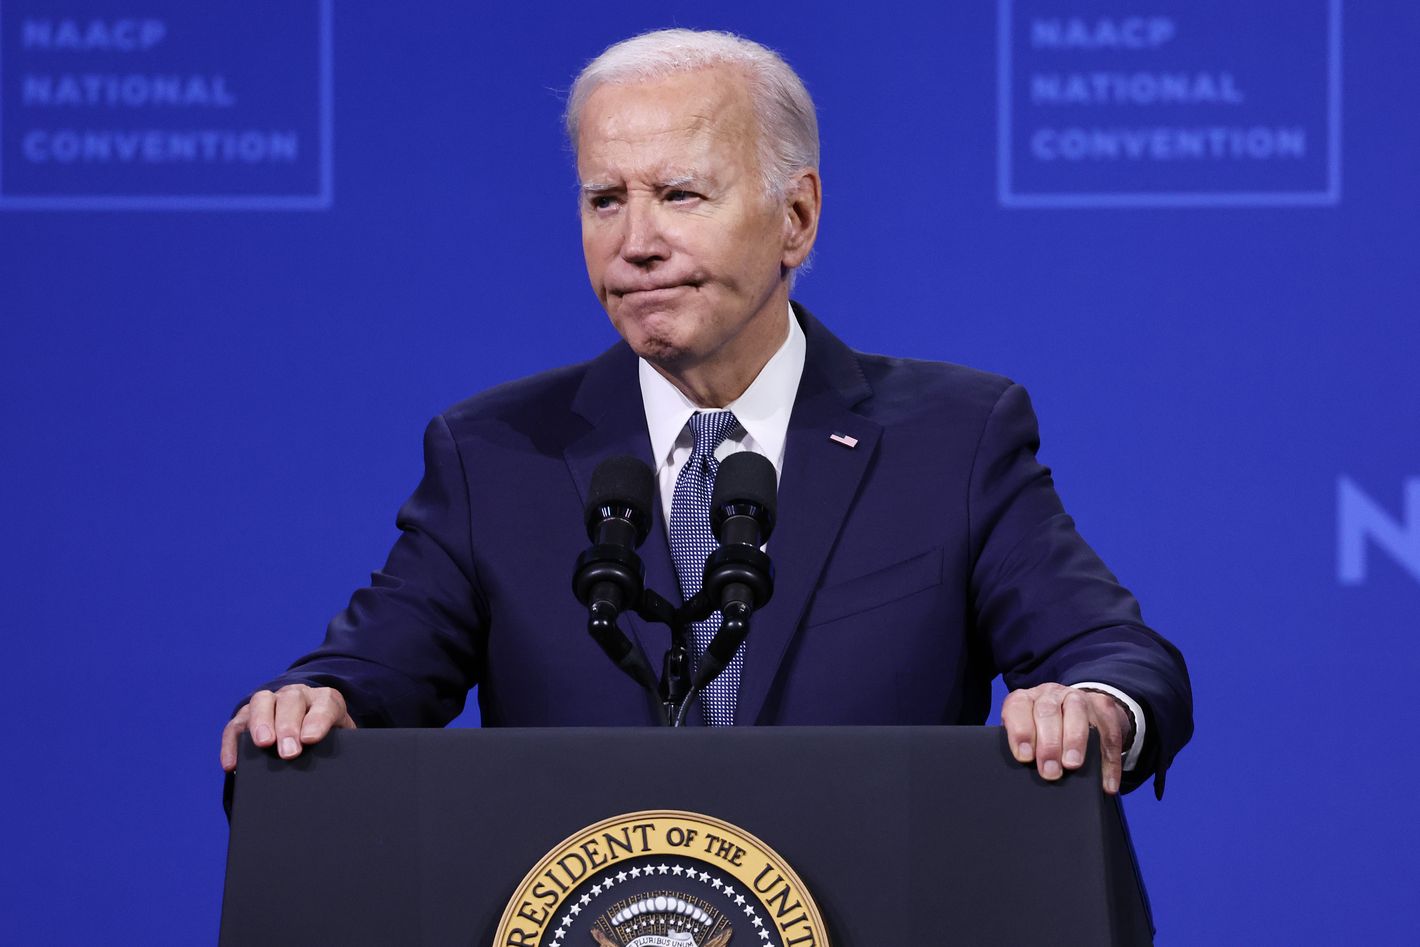 Which Pop-Culture Twitter Account Told You Biden Was Dropping Out?